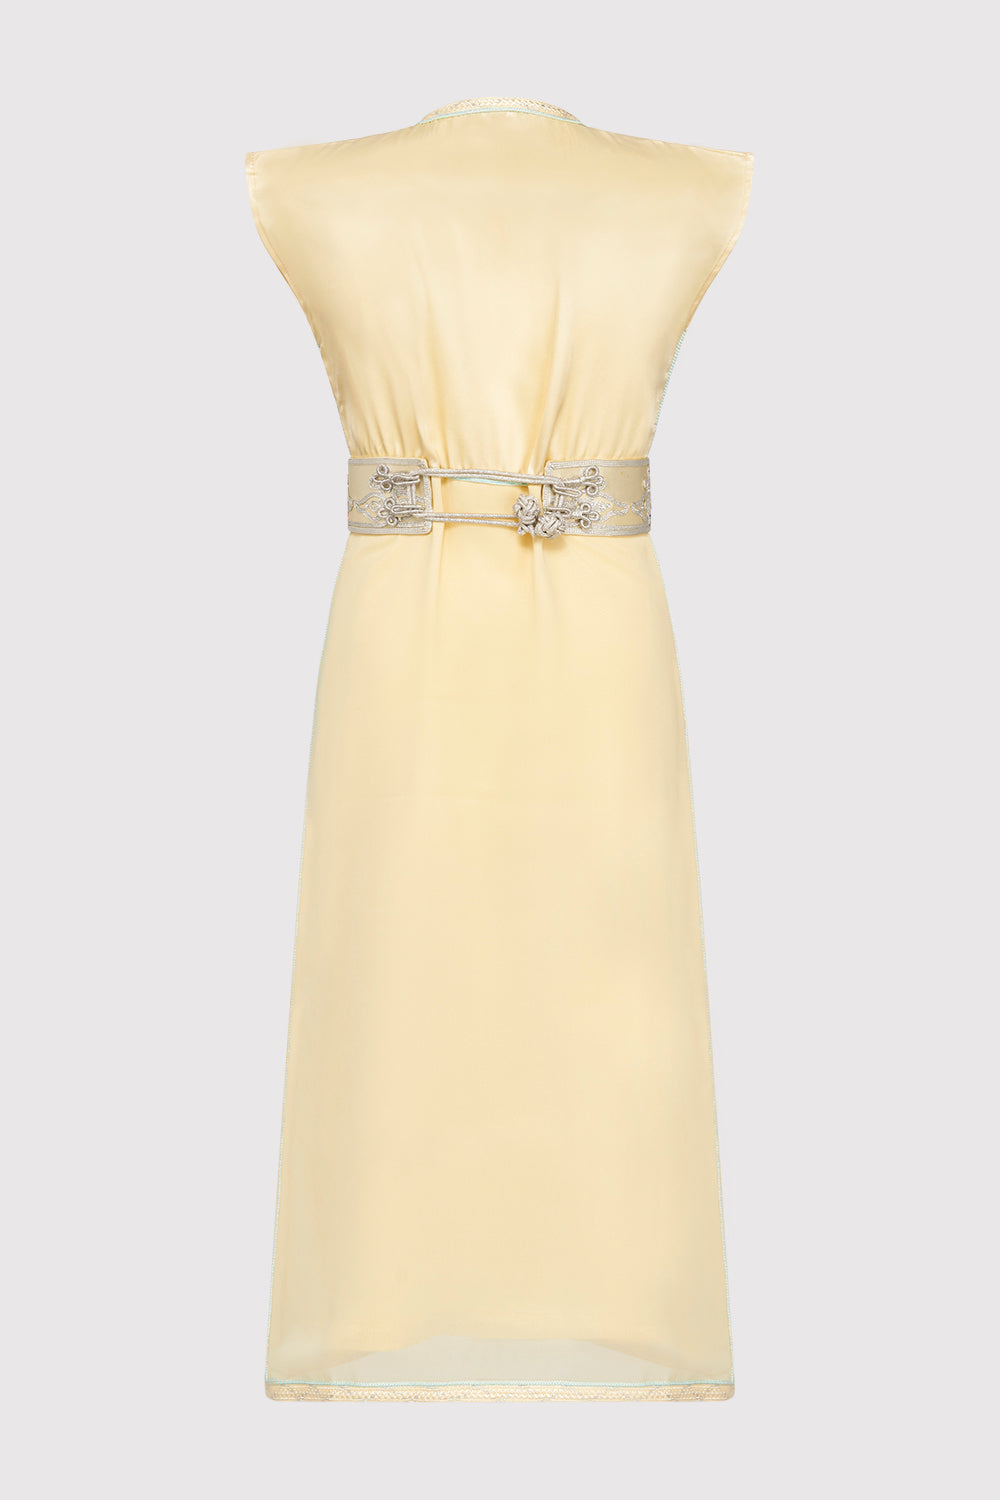 Kaftan Radia Girl's Embroidered Occasion Wear Party Sleeveless Dress and Waist Belt in Satin Yellow (2-12yrs)